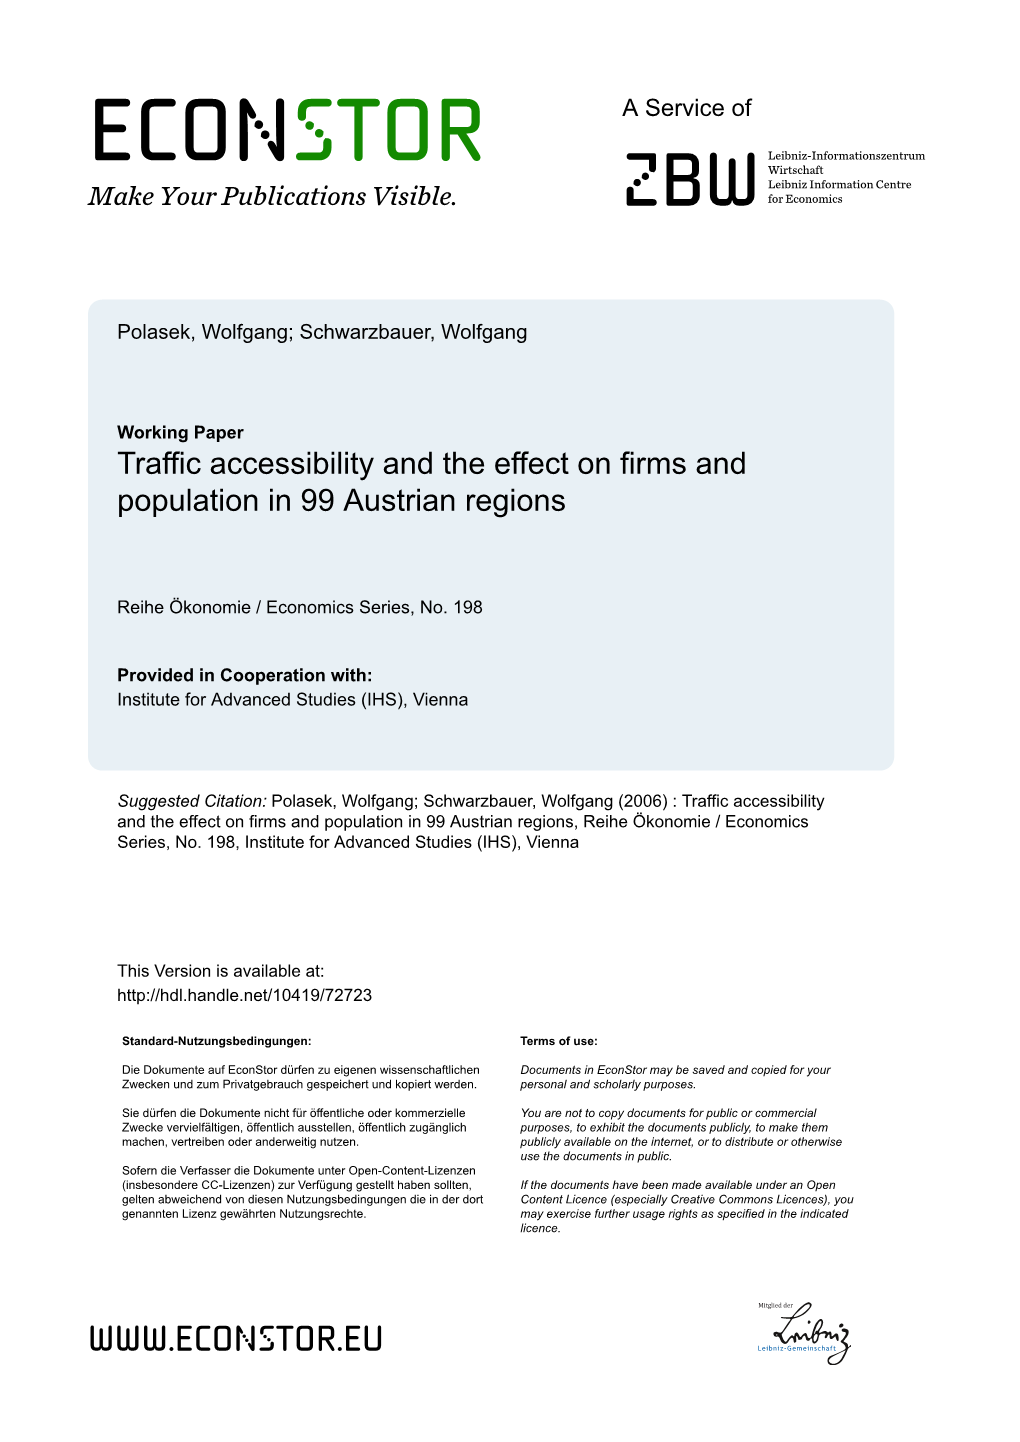 Traffic Accessibility and the Effect on Firms and Population in 99 Austrian Regions